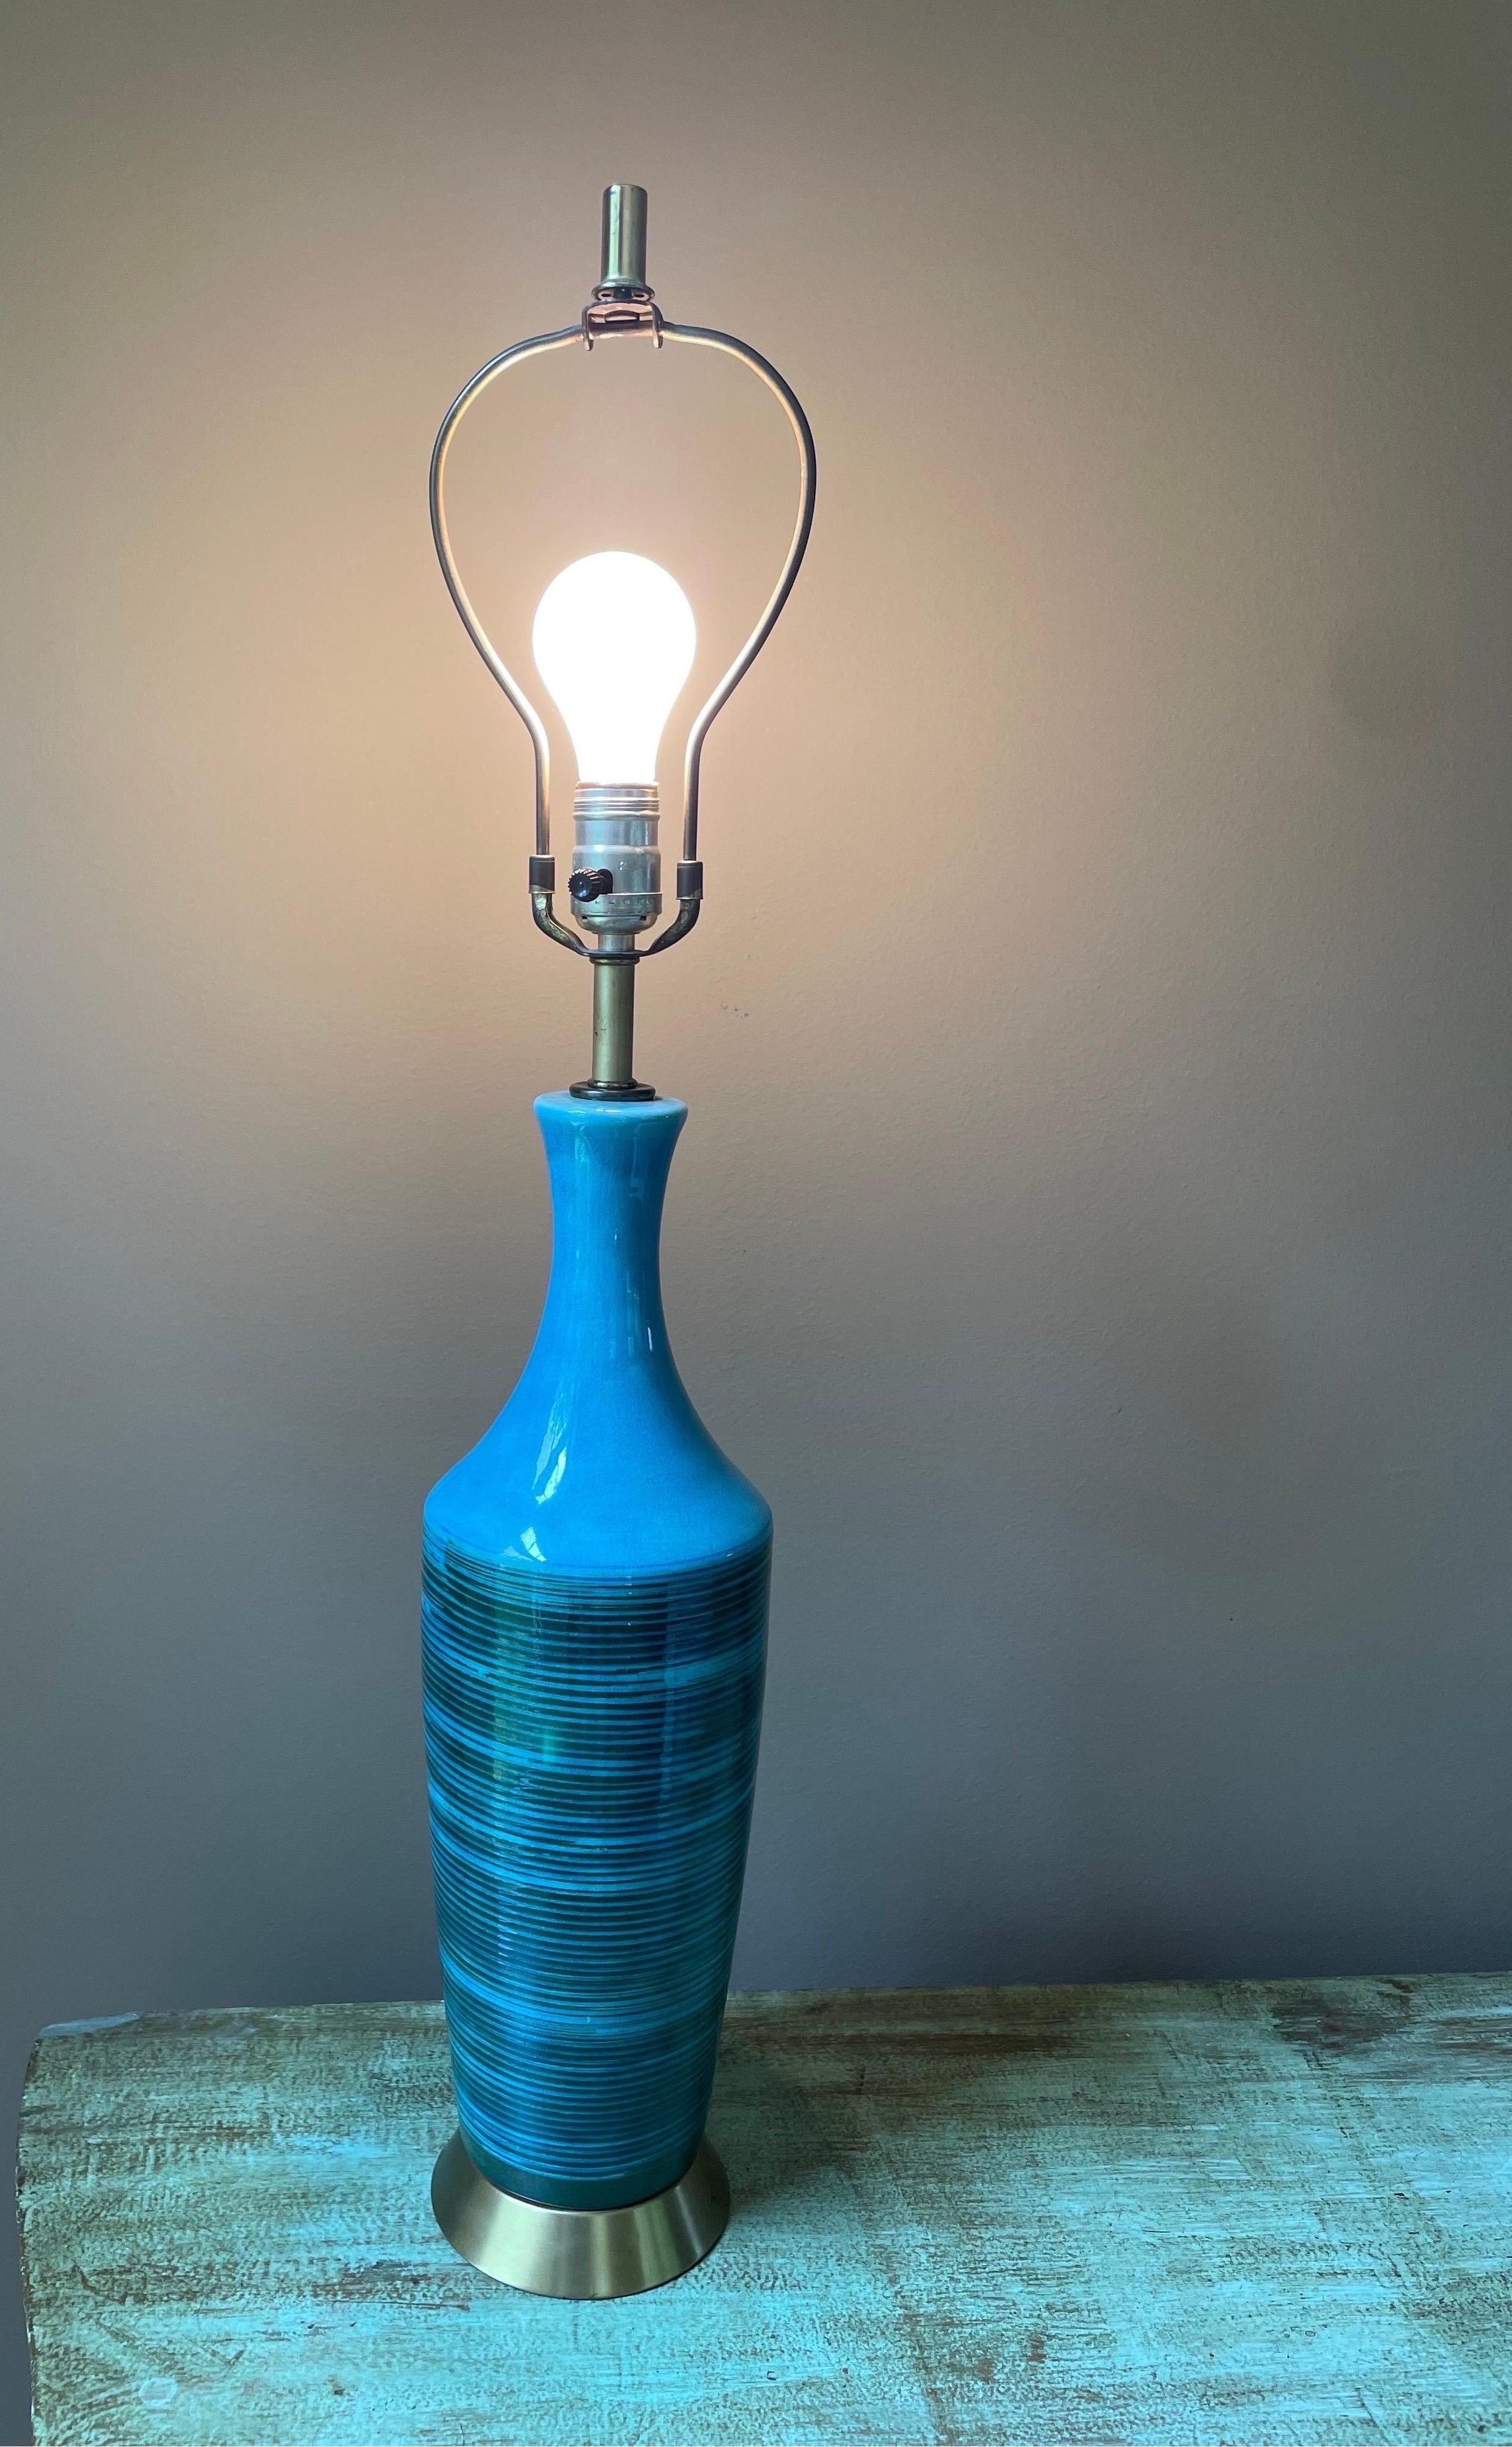 Colorful and stylish, this midcentury style ceramic table lamp is a great way to add a pop of color and functionality to any room that needs a pick-me-up! The best thing about this lamp is the color - turquoise base with right blue/green ribs